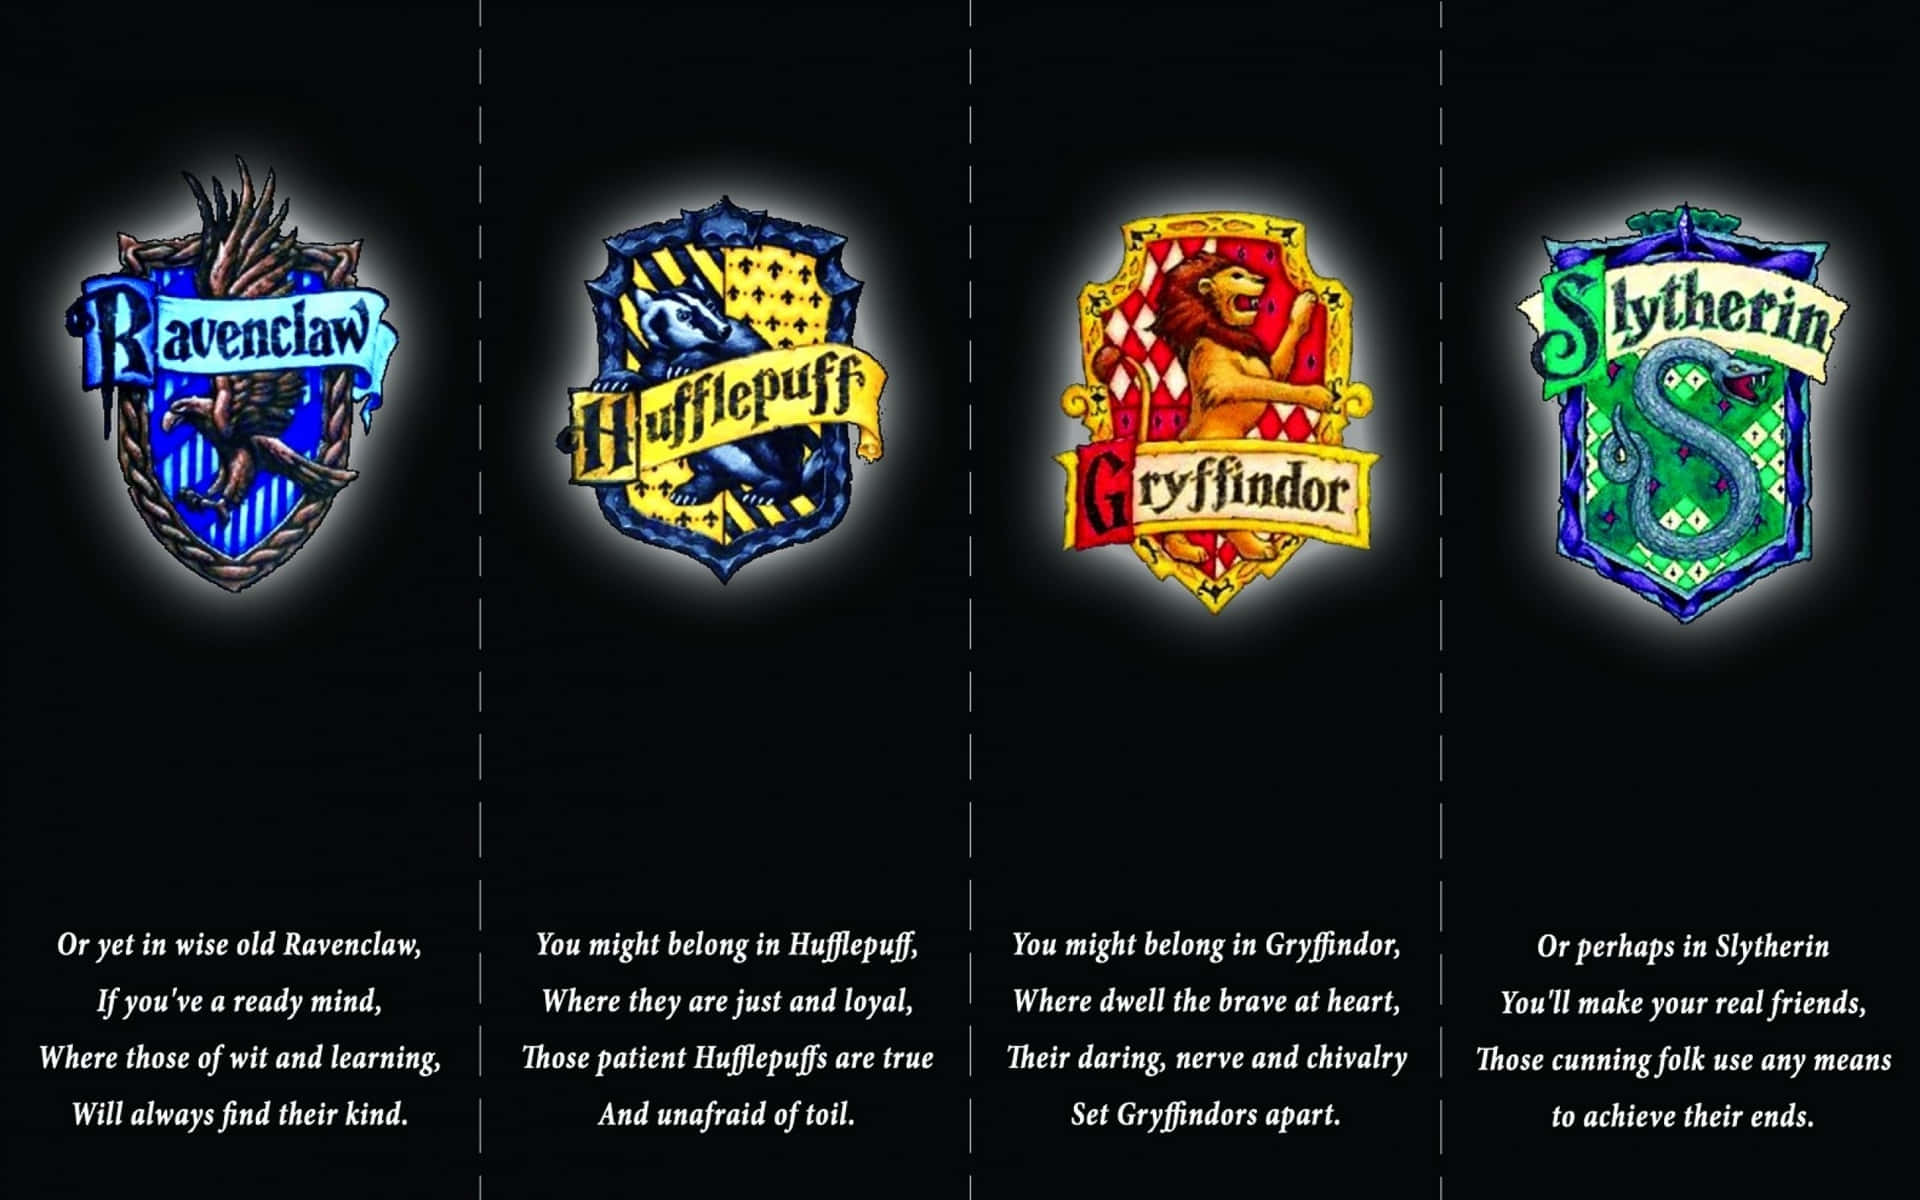 Welcome to Ravenclaw